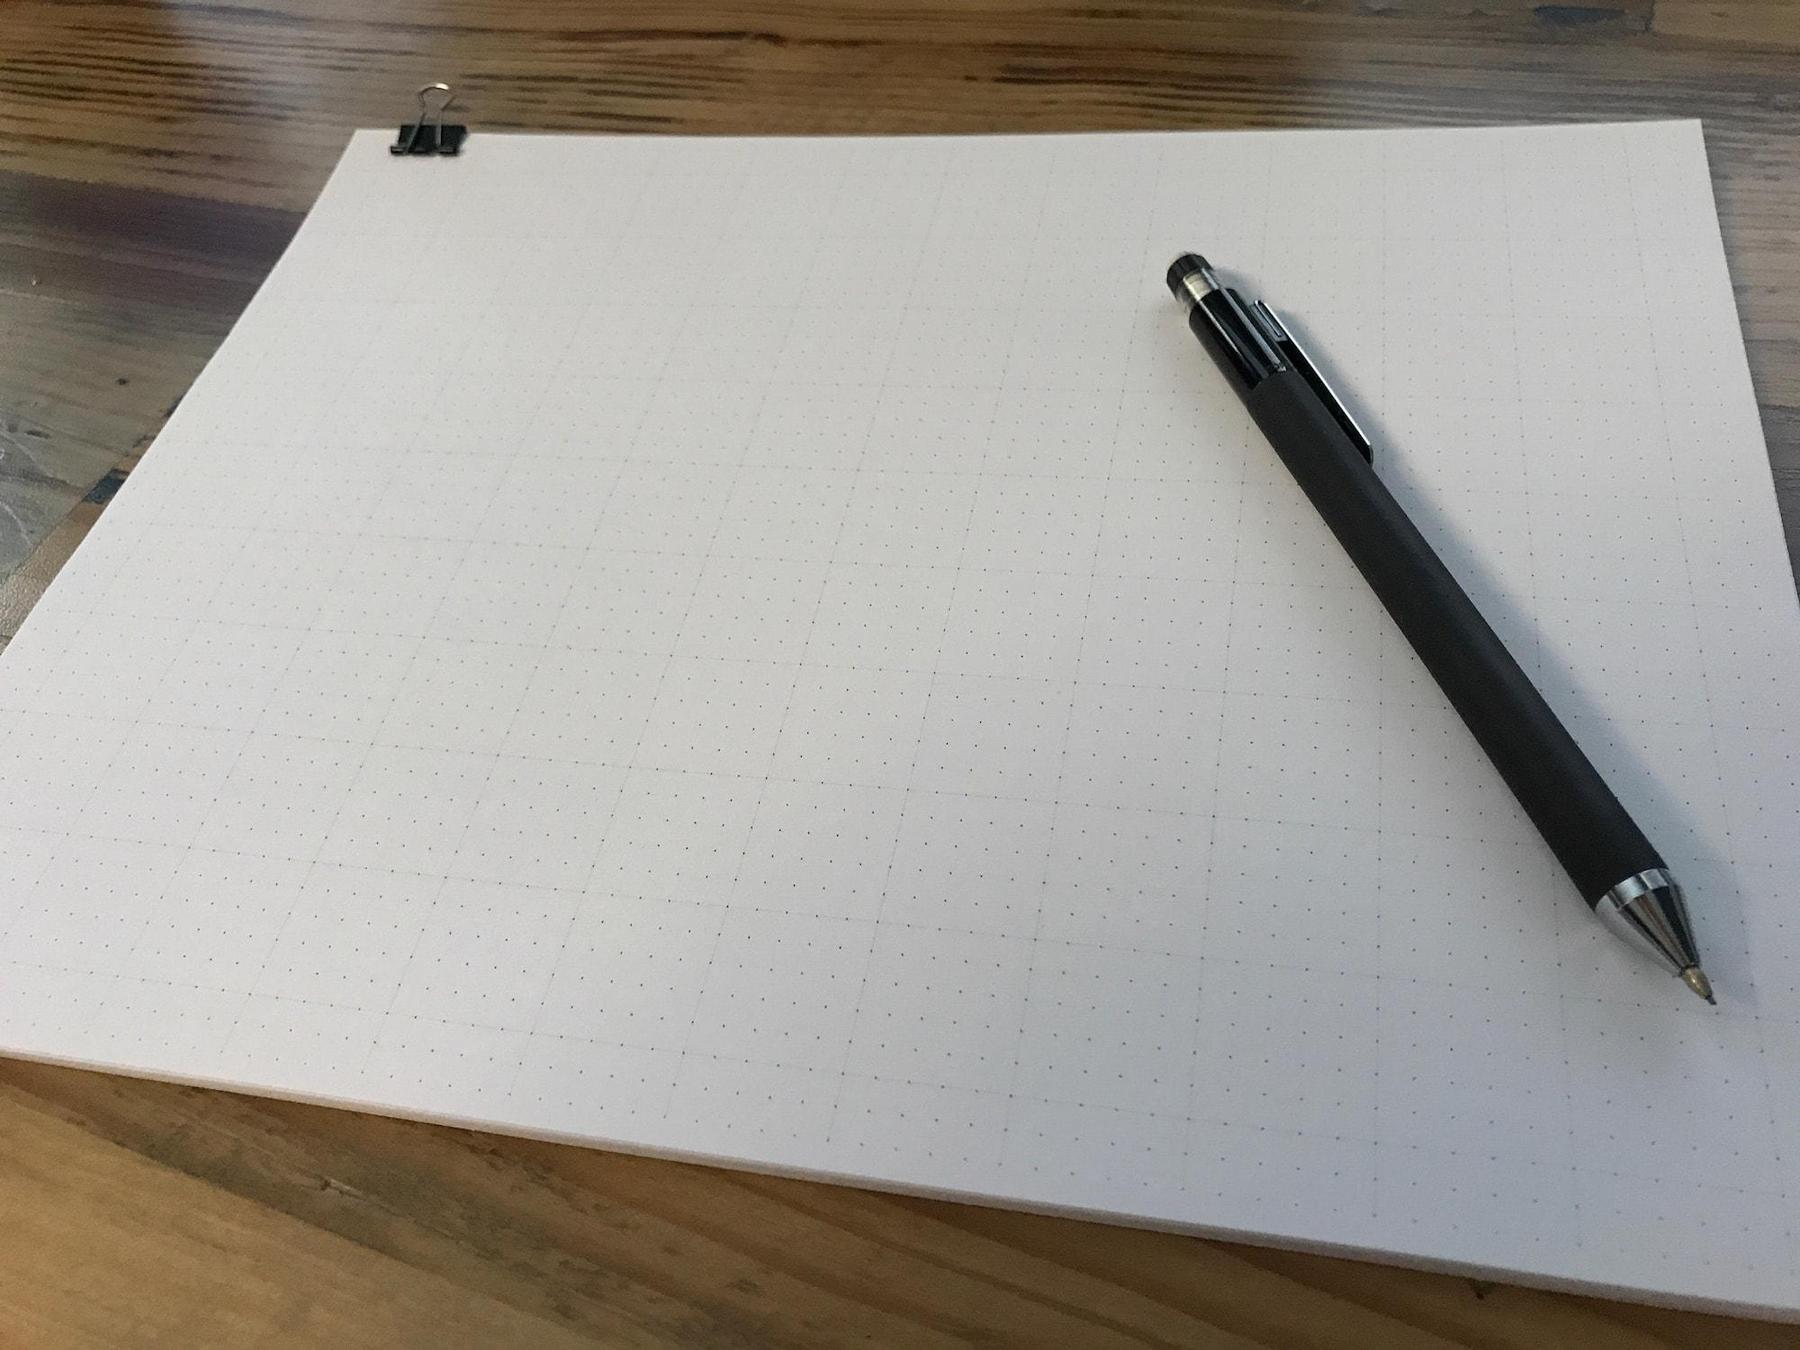 A small stack of dot paper on top of a wooden desk with a mechanical pencil on top